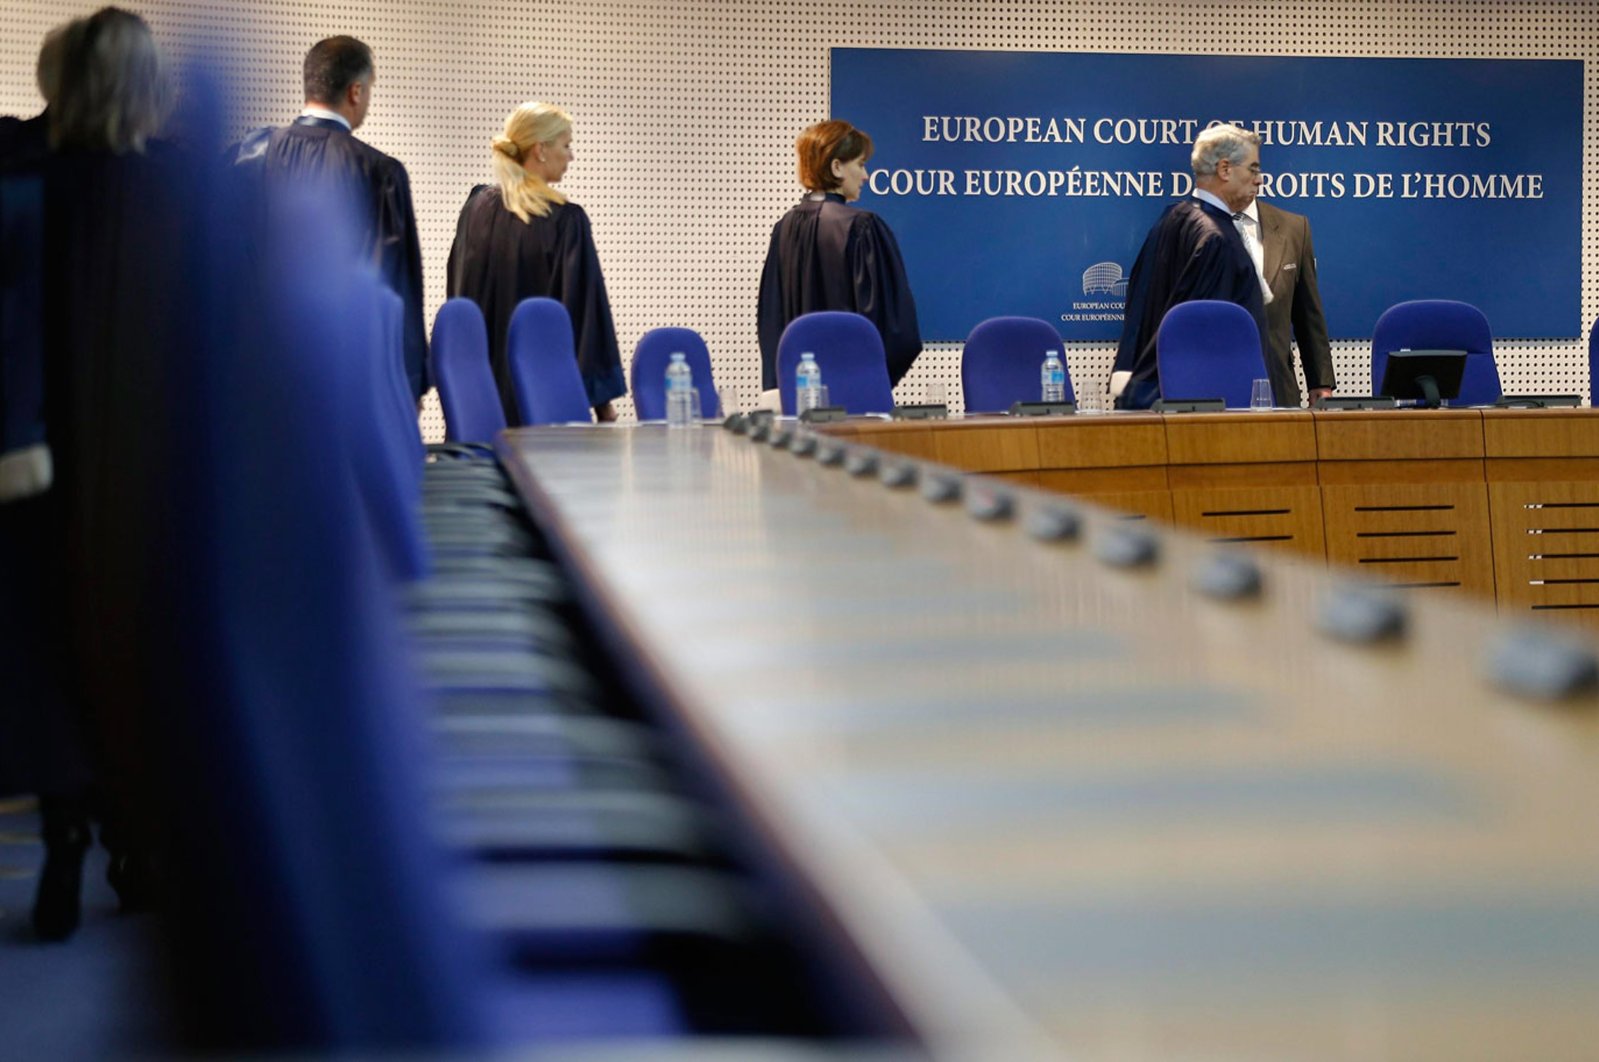 Judges of the European Court of Human Rights enter the hearing room of the court in Strasbourg, France, Dec. 3, 2013. 